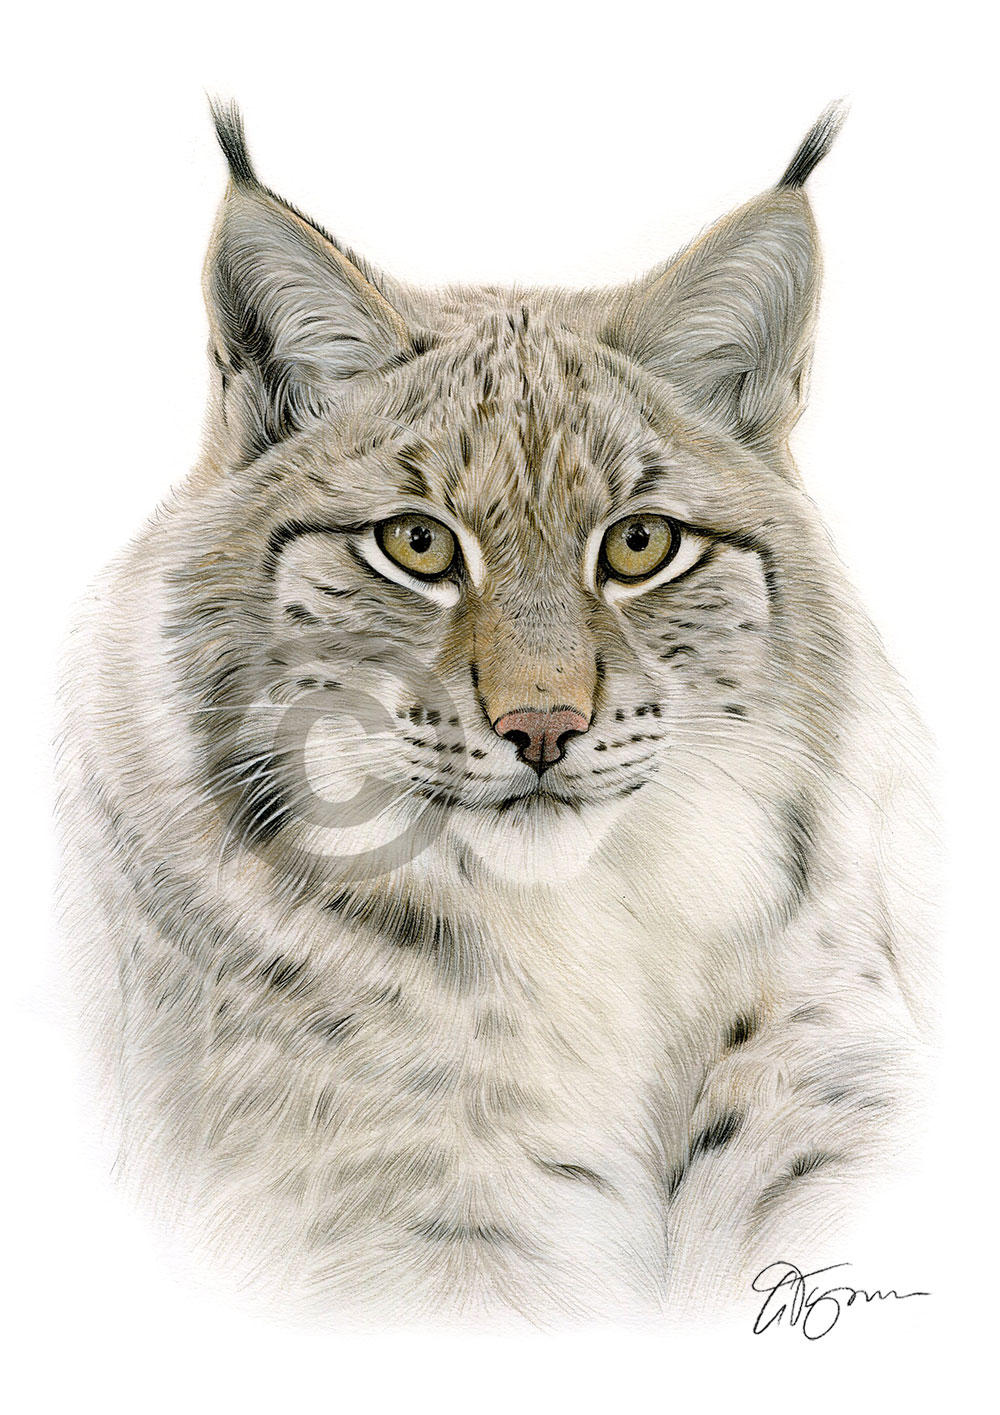 Colour pencil drawing of a lynx by UK artist Gary Tymon